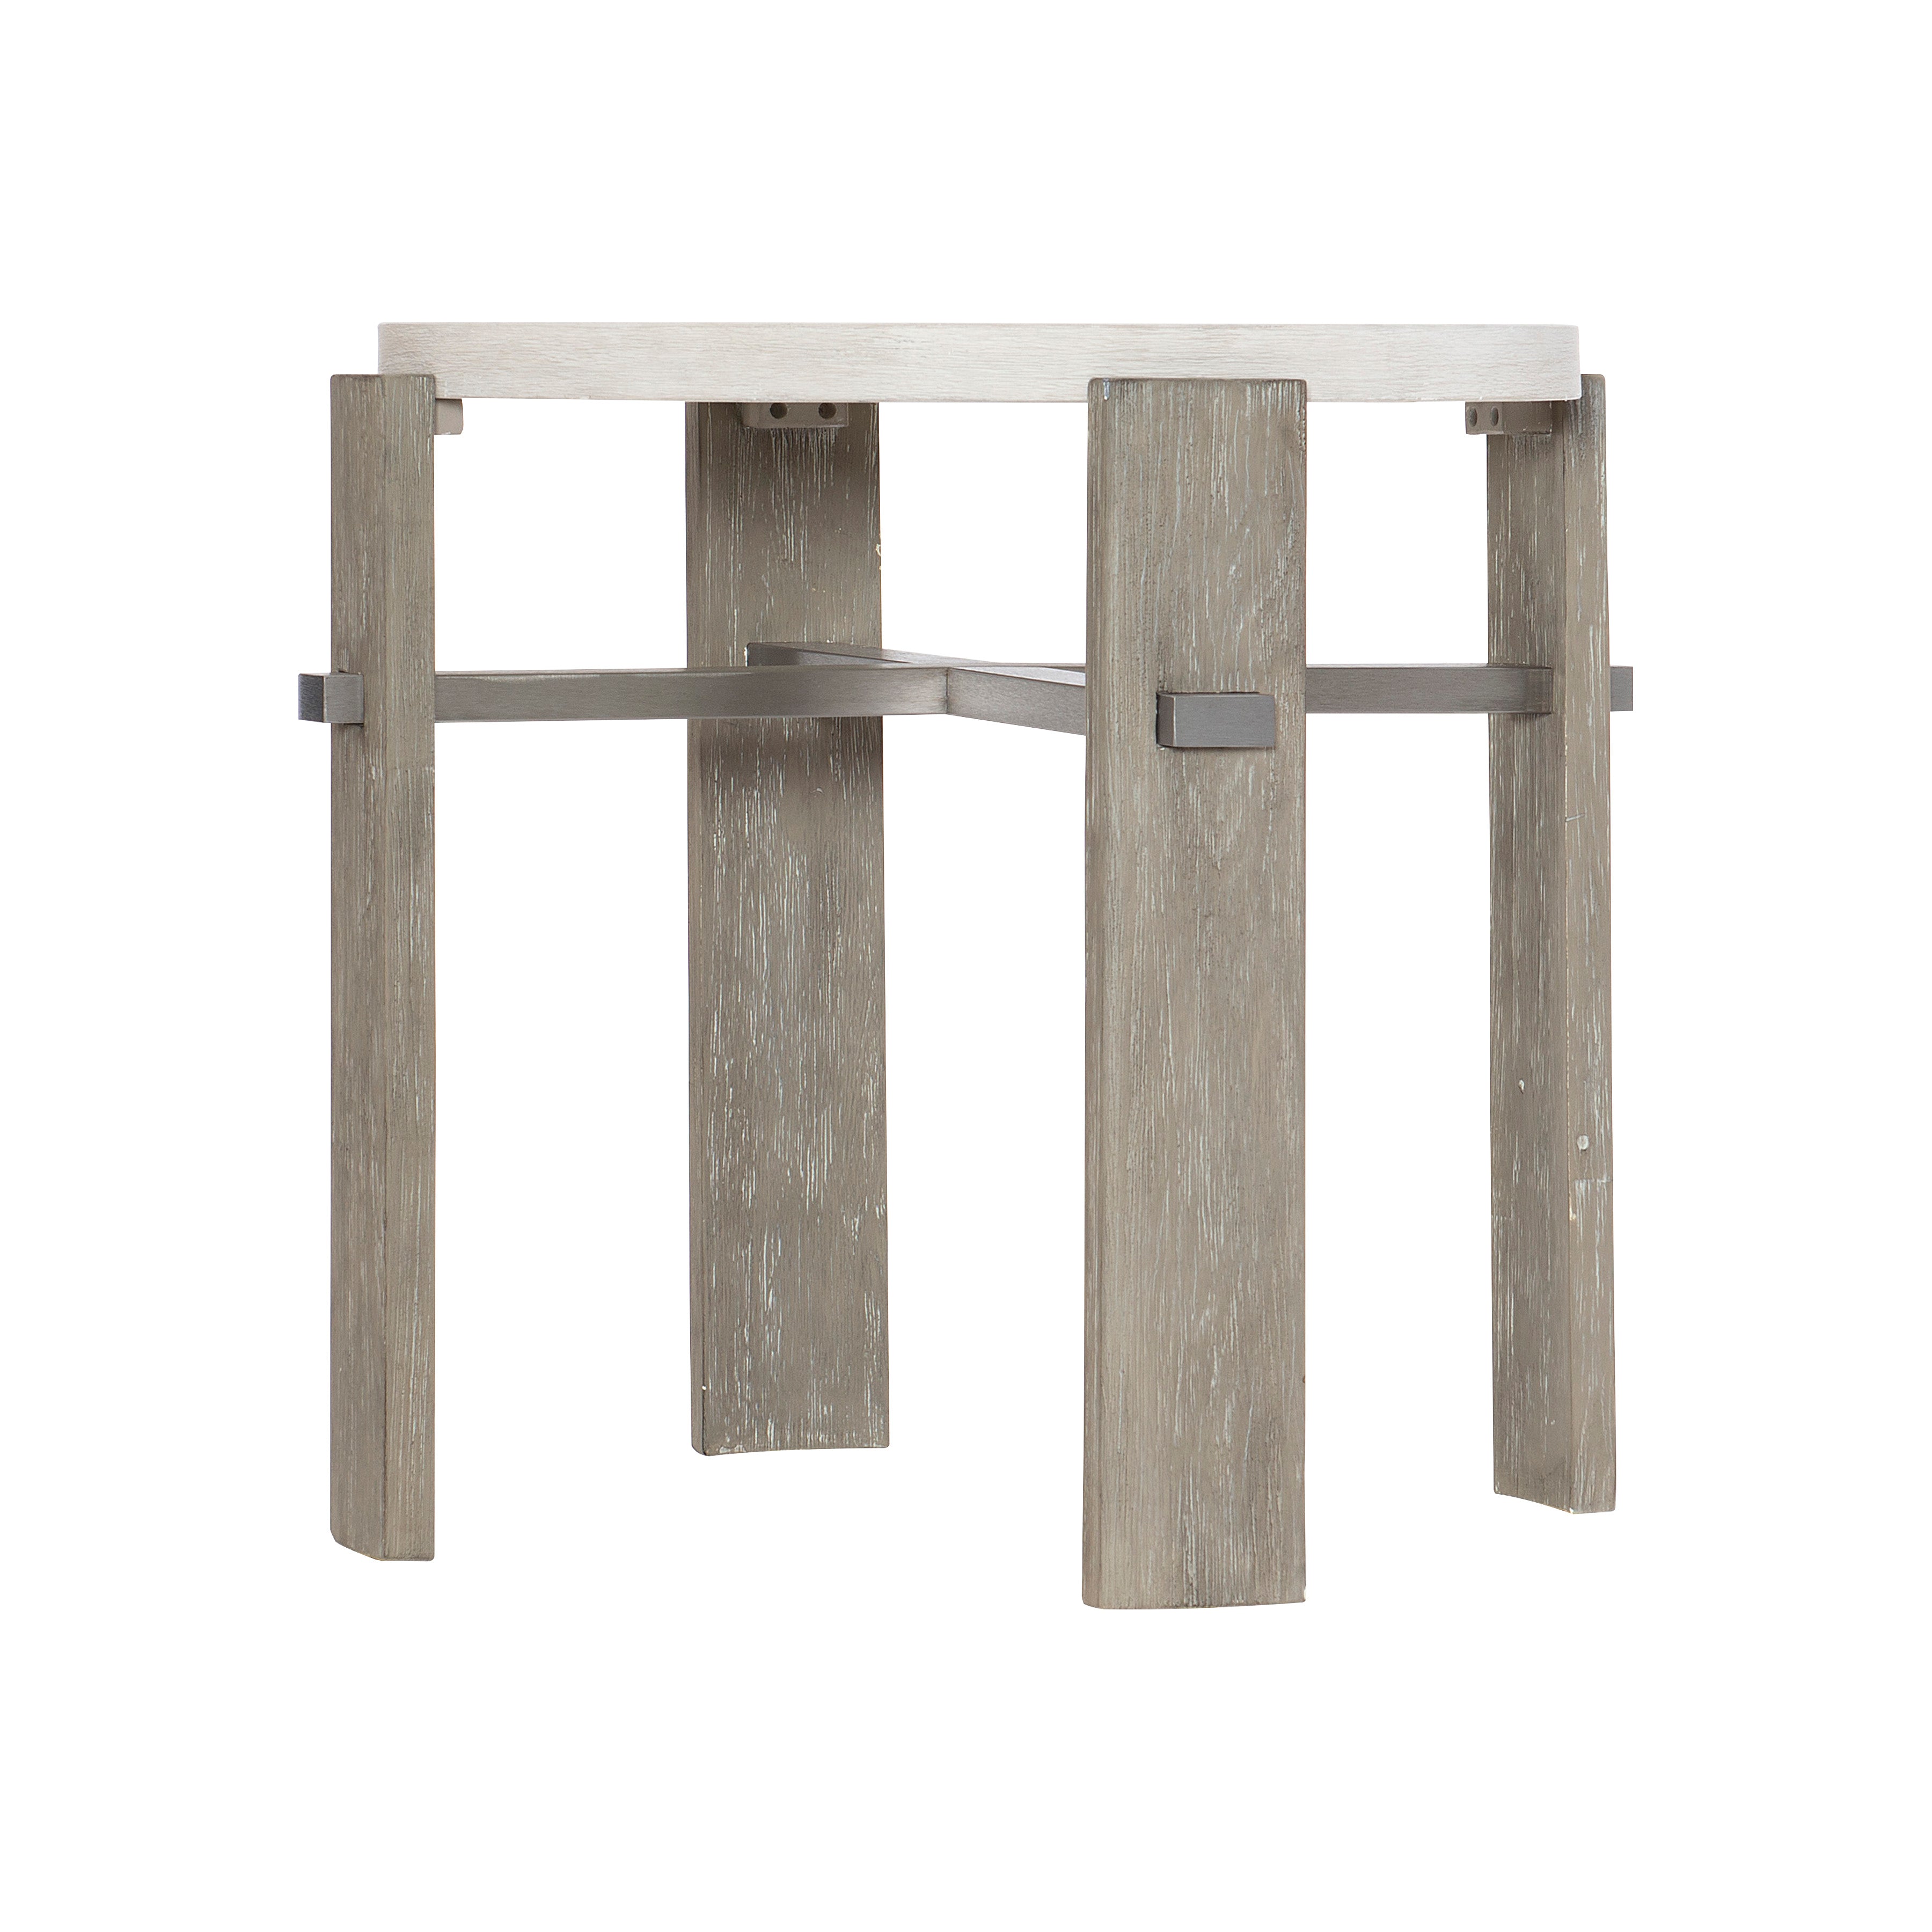 Foundations Round Side Table with Four Legs